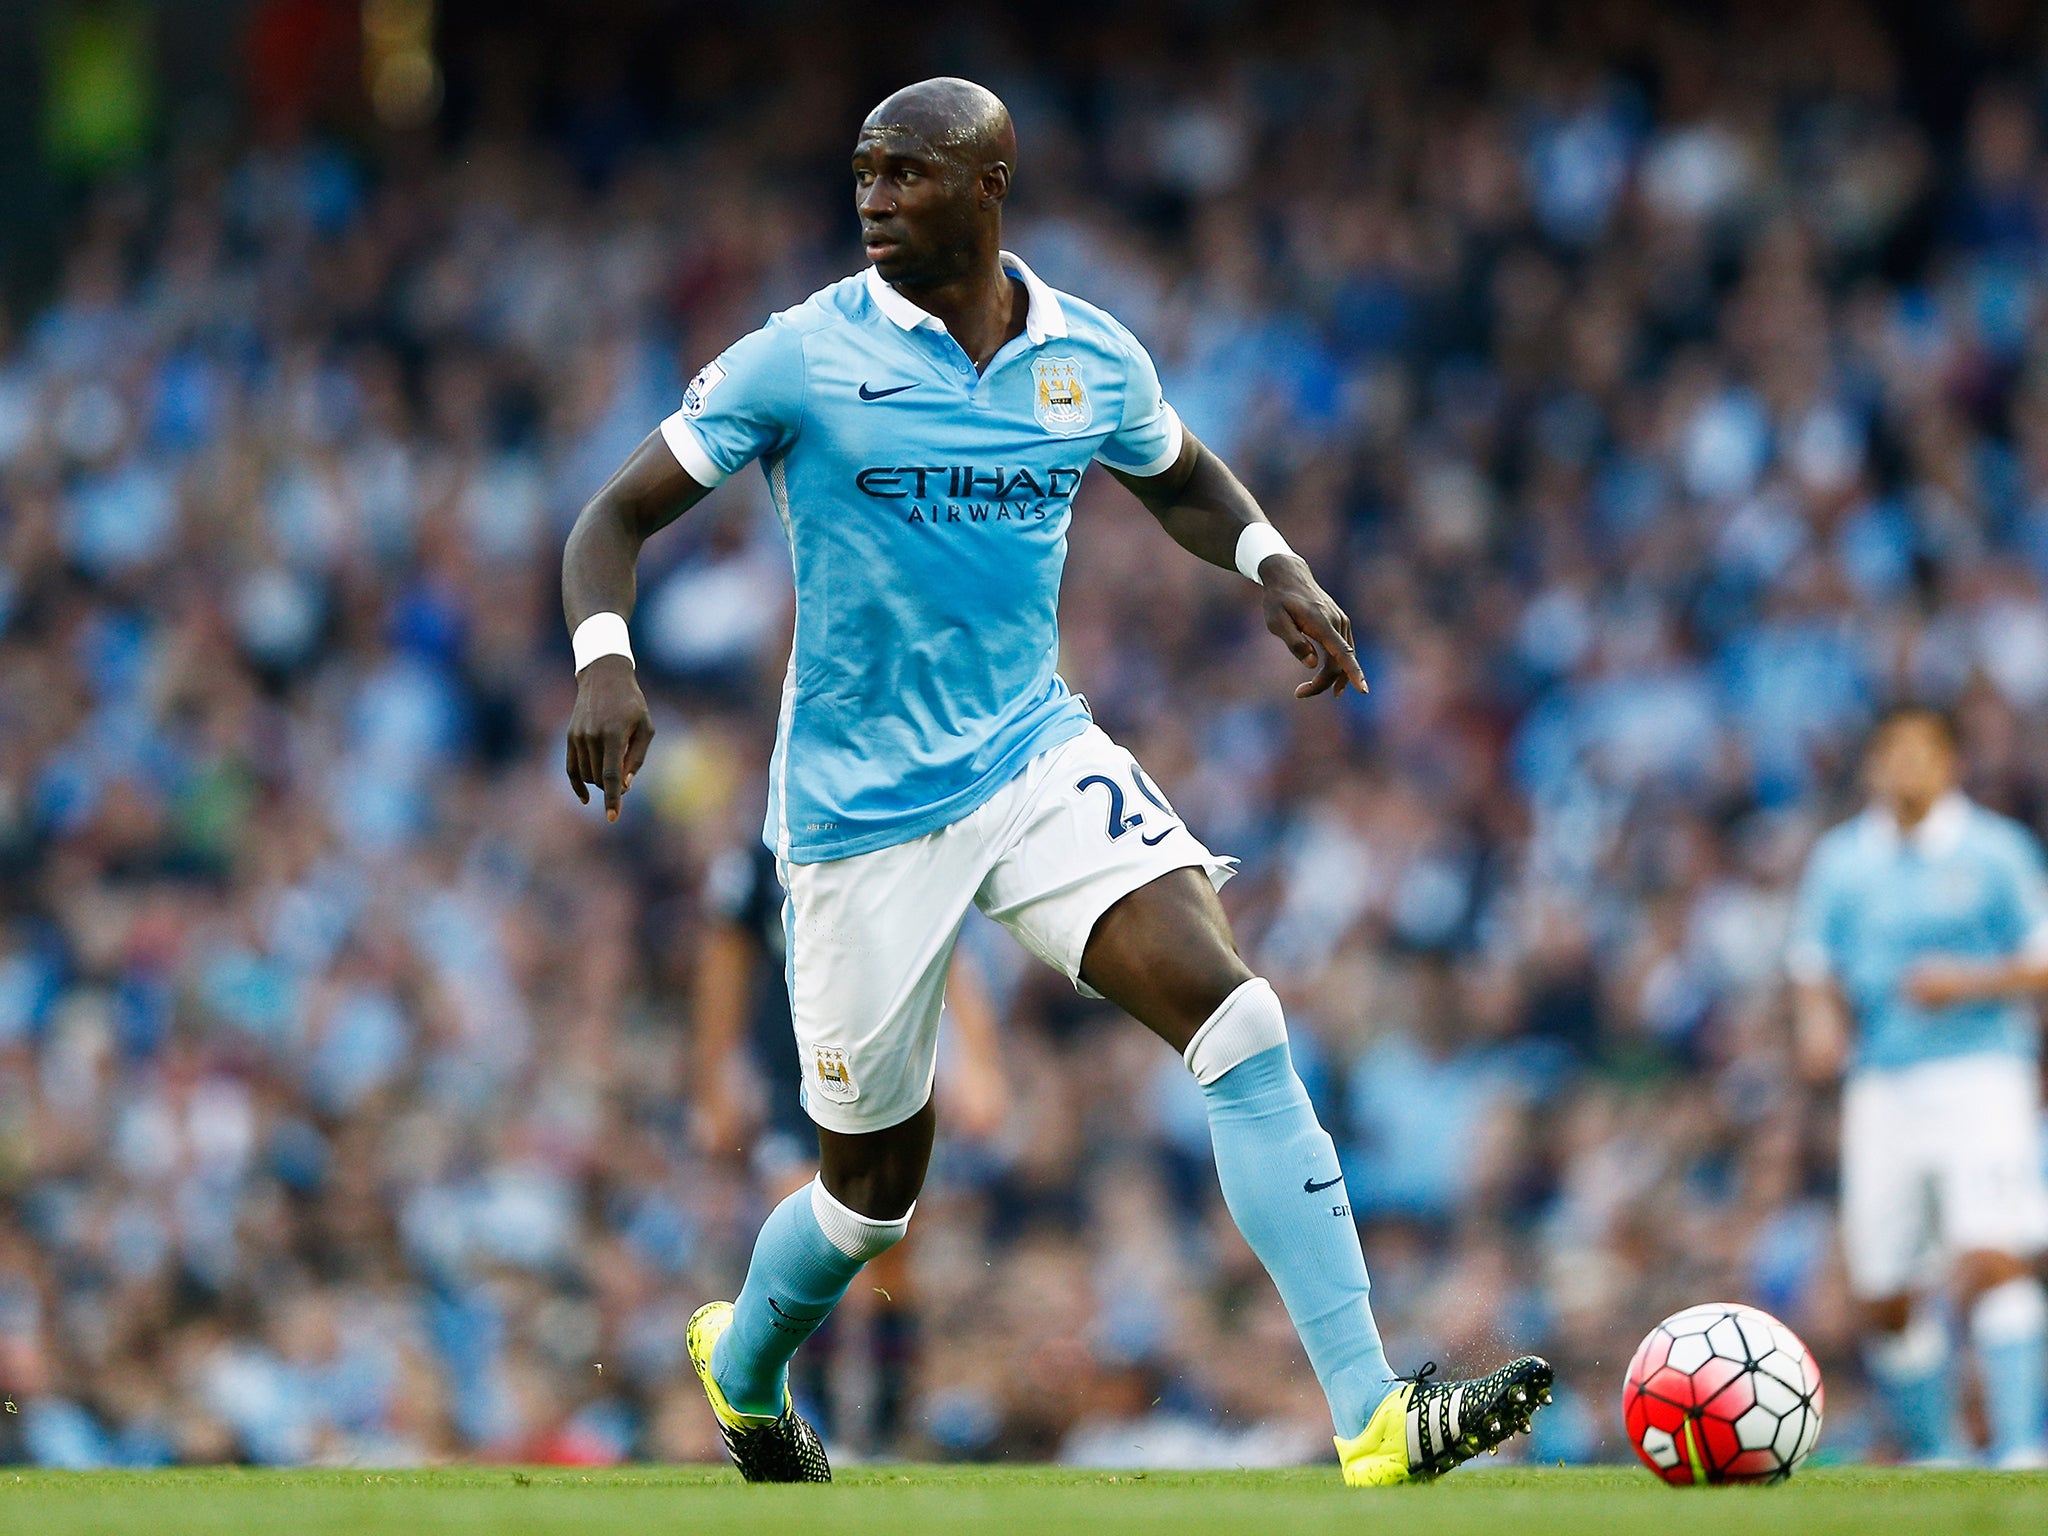 Eliaquim Mangala signed for Manchester City in a £42m deal